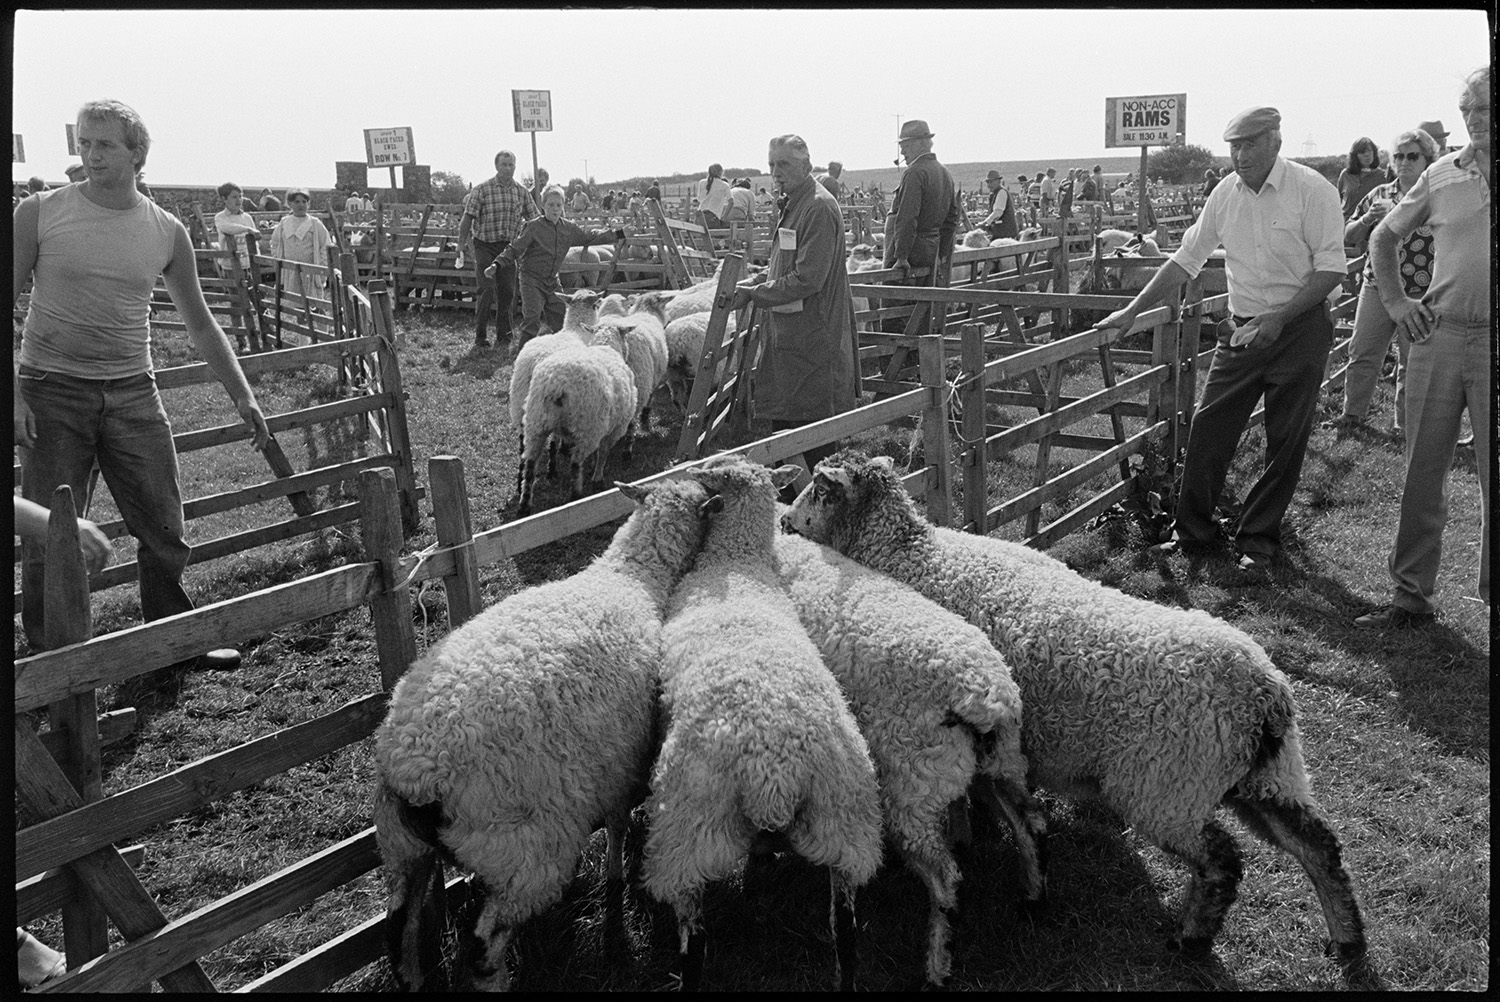 View over pens at sheep fair. <br />
[Men moving sheep from one pen into another at South Molton Sheep Fair. Other people are watching and two of the men are smoking pipes.]